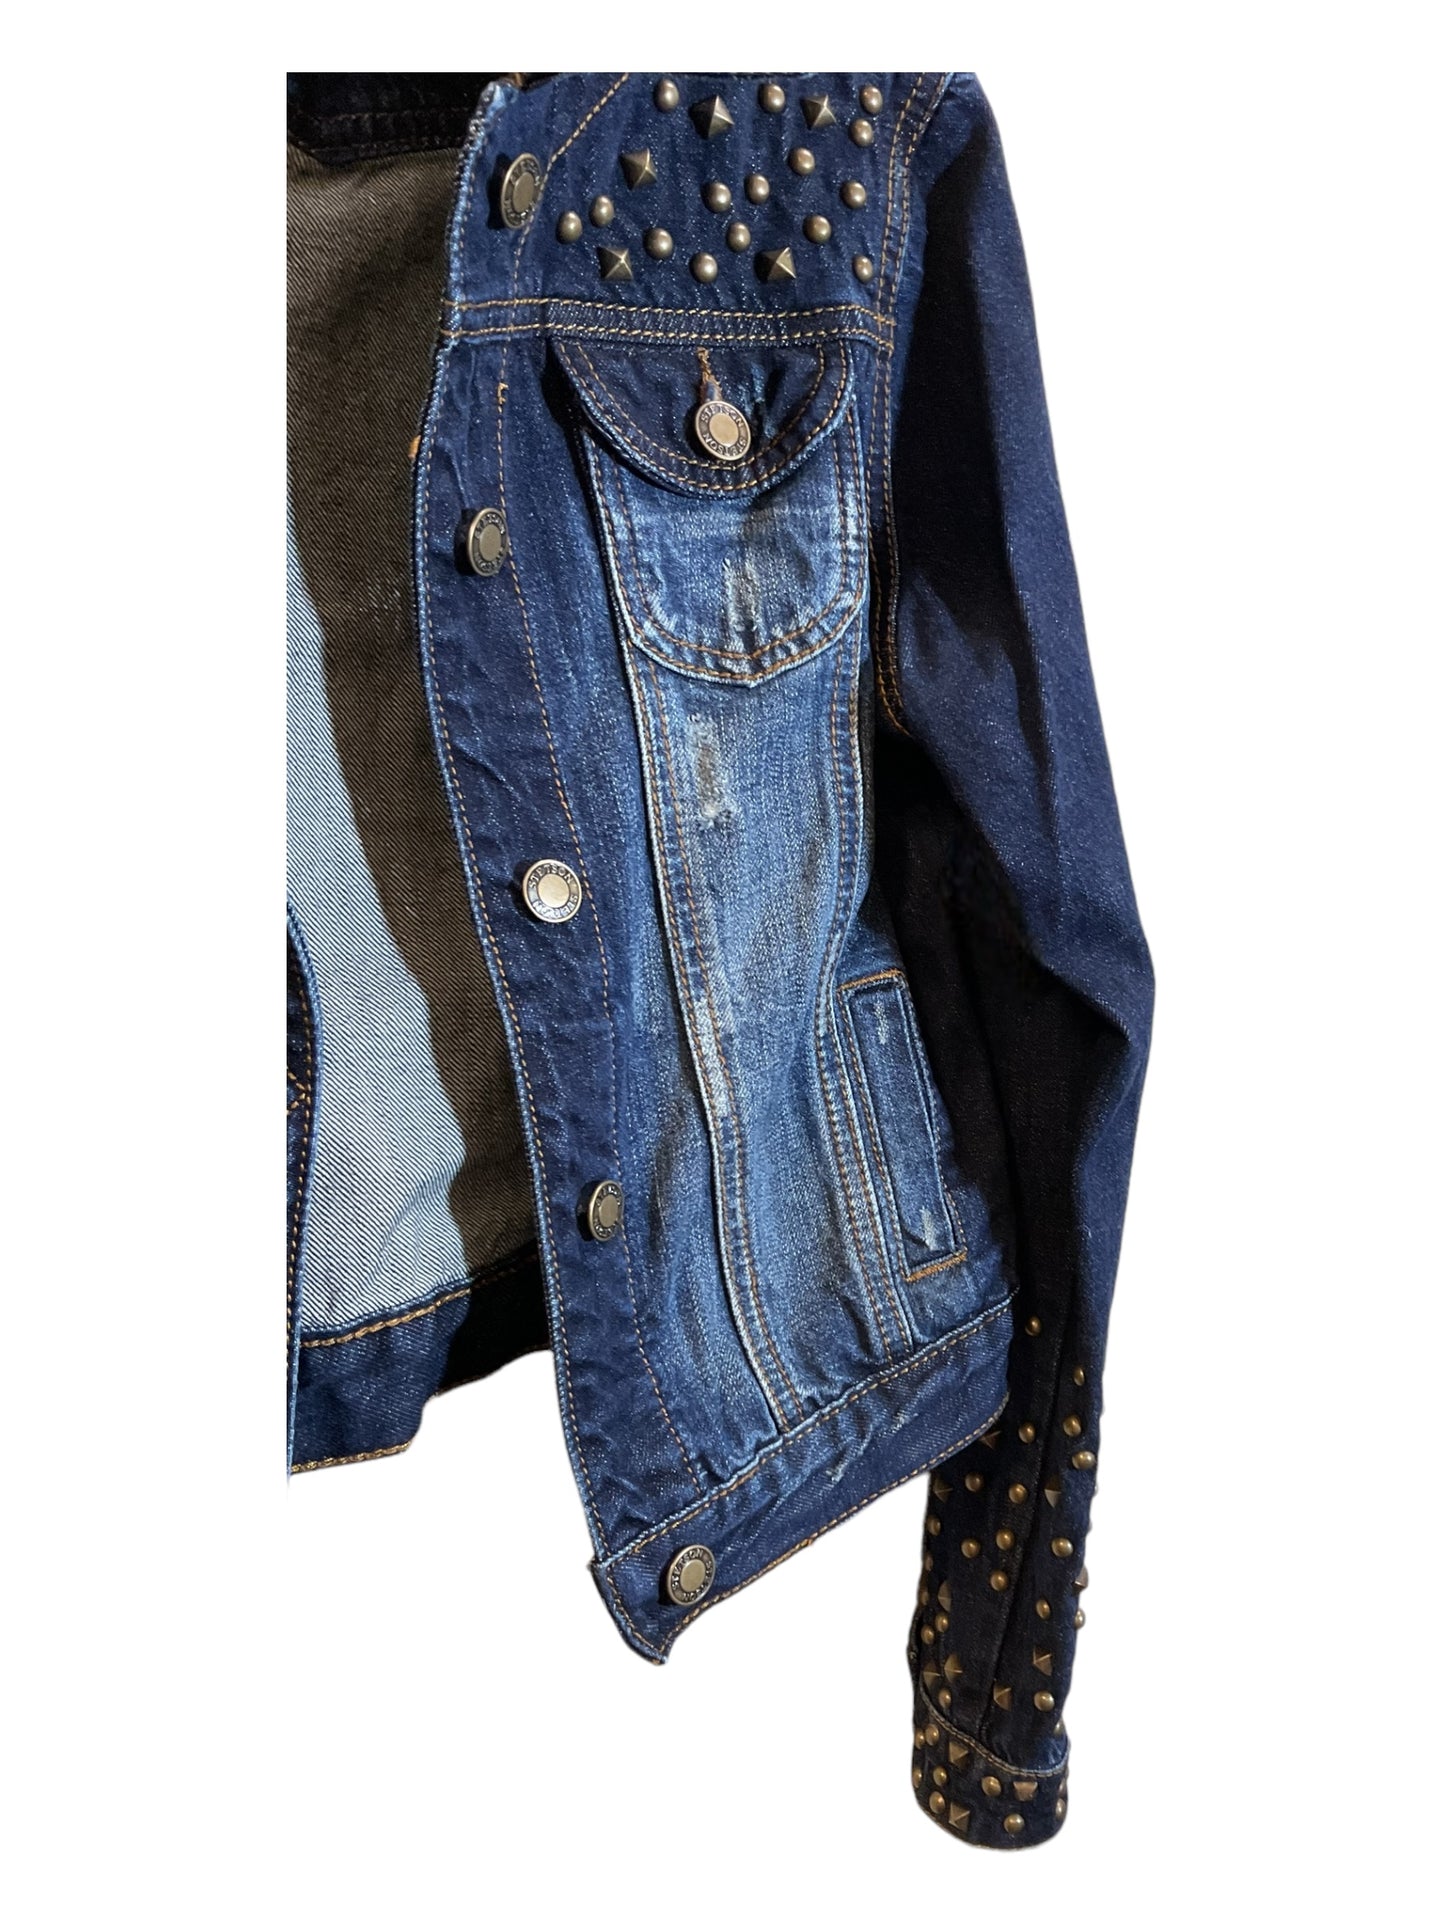 Jacket Denim By Clothes Mentor  Size: 2